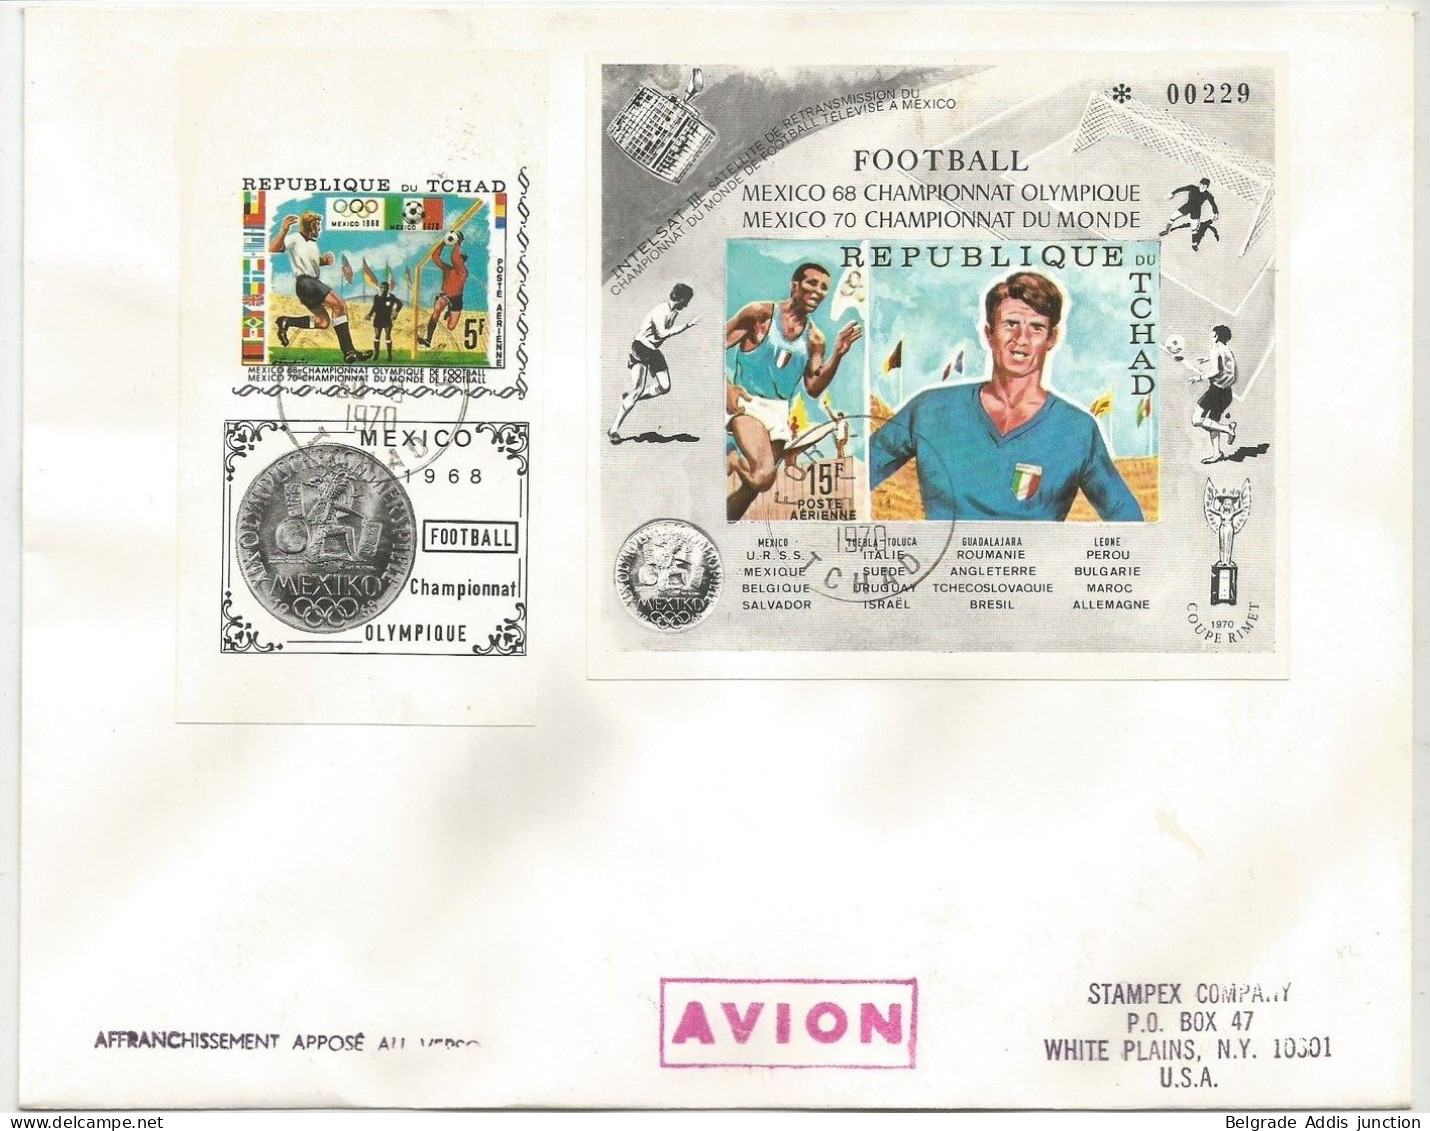 Tchad Tschad Chad Mi.307B + Bl.8B Stamp + Block IMPERFORATED Used On Cover To USA 1970 Olympic Football - 1970 – Mexique